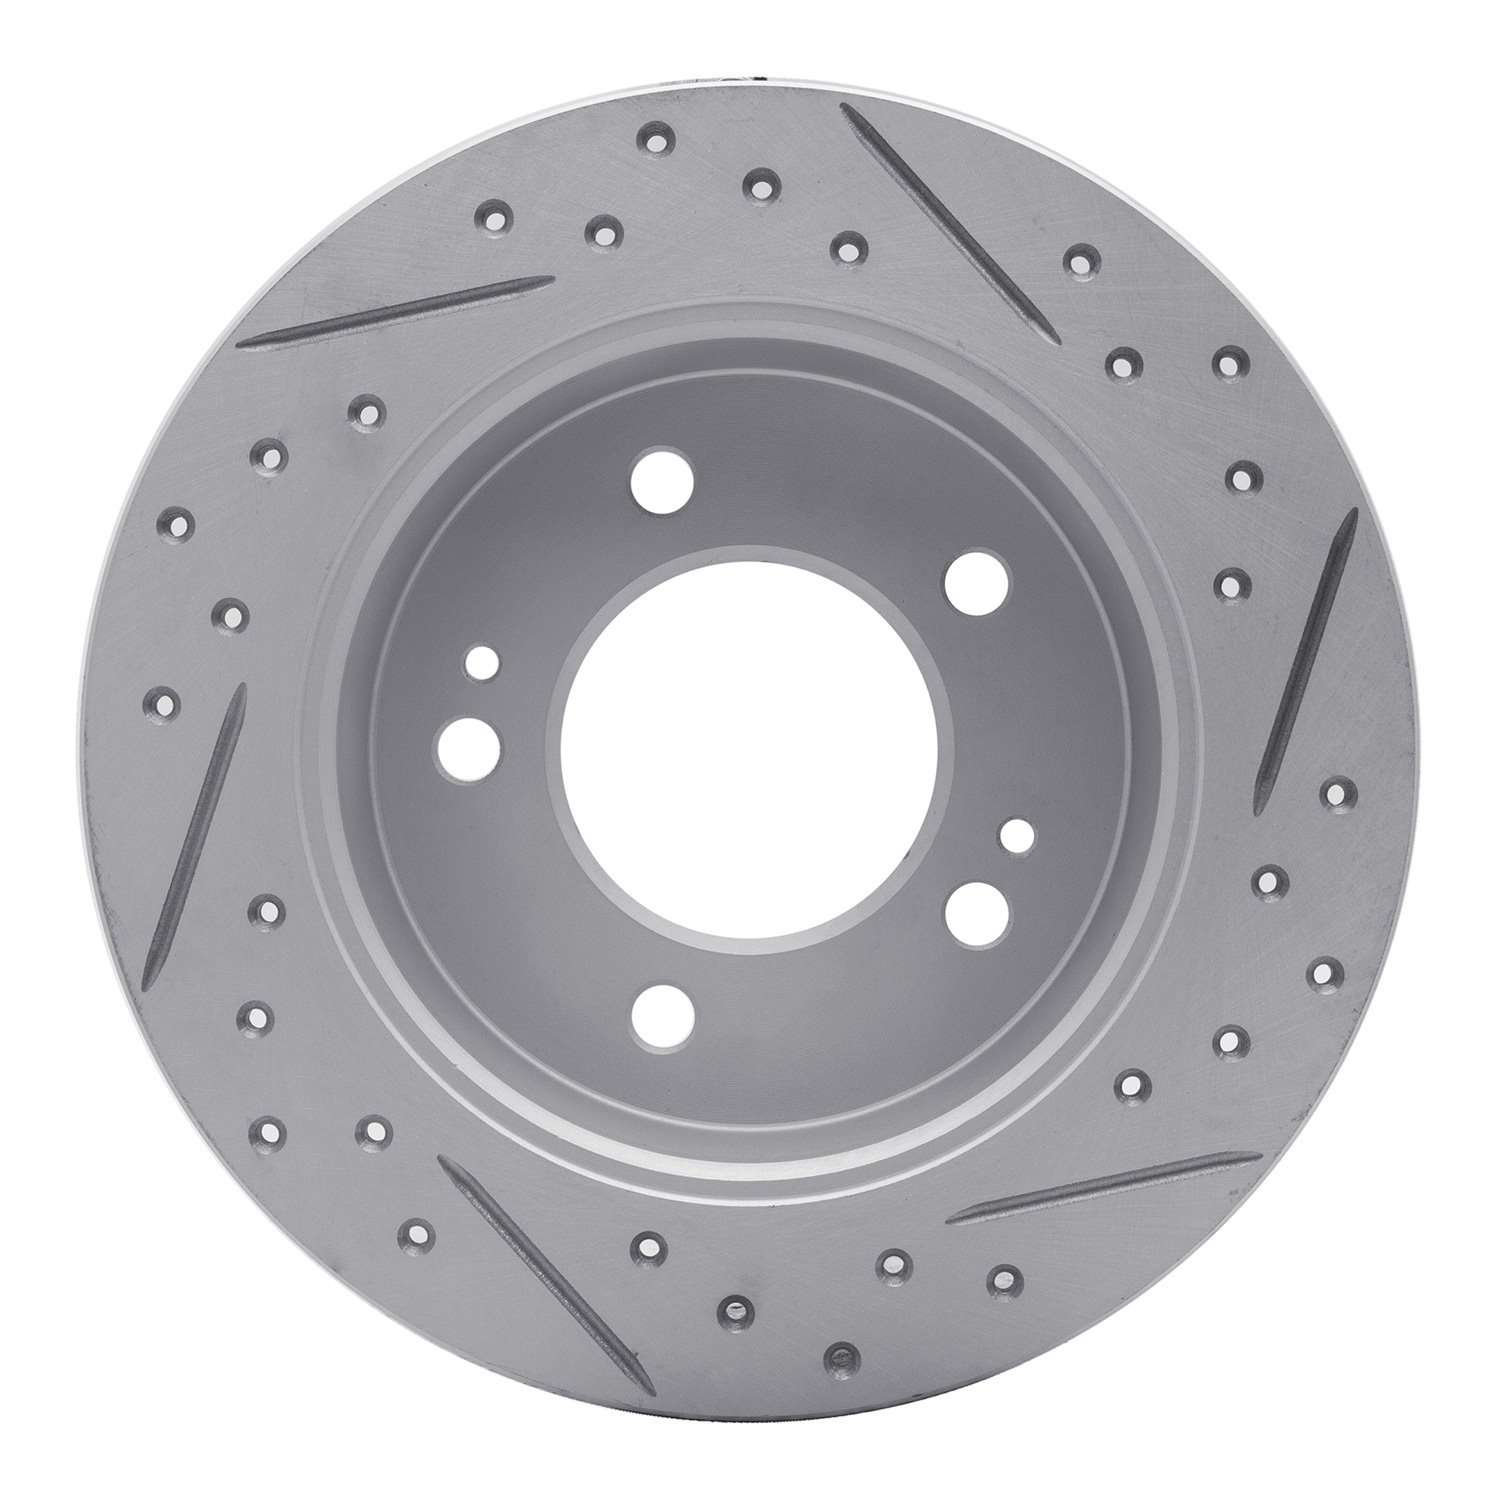 830-03037L Geoperformance Drilled/Slotted Brake Rotor, Fits Select Kia/Hyundai/Genesis, Position: Rear Left